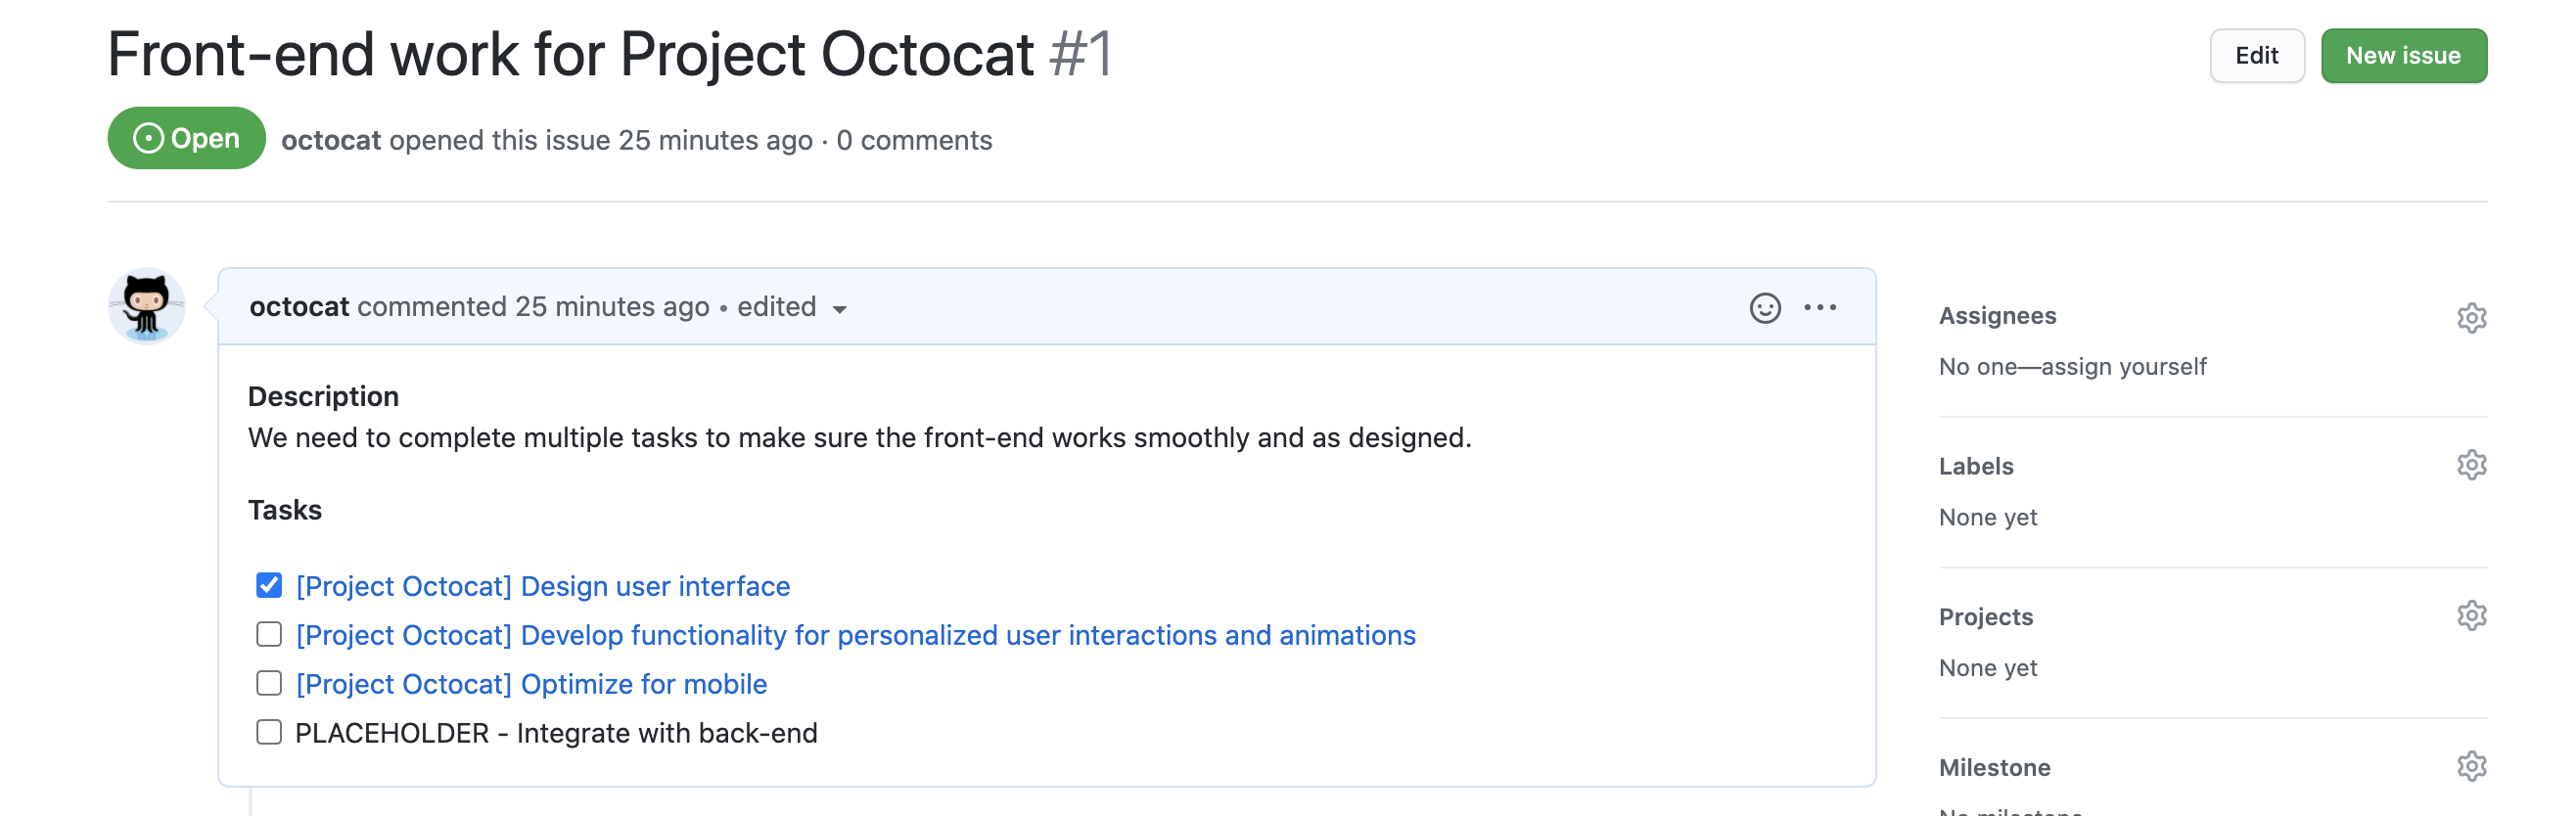 Screenshot of an issue called "Front-end work for Project Octocat." The issue body contains a task list, with a checkbox preceding each issue link.